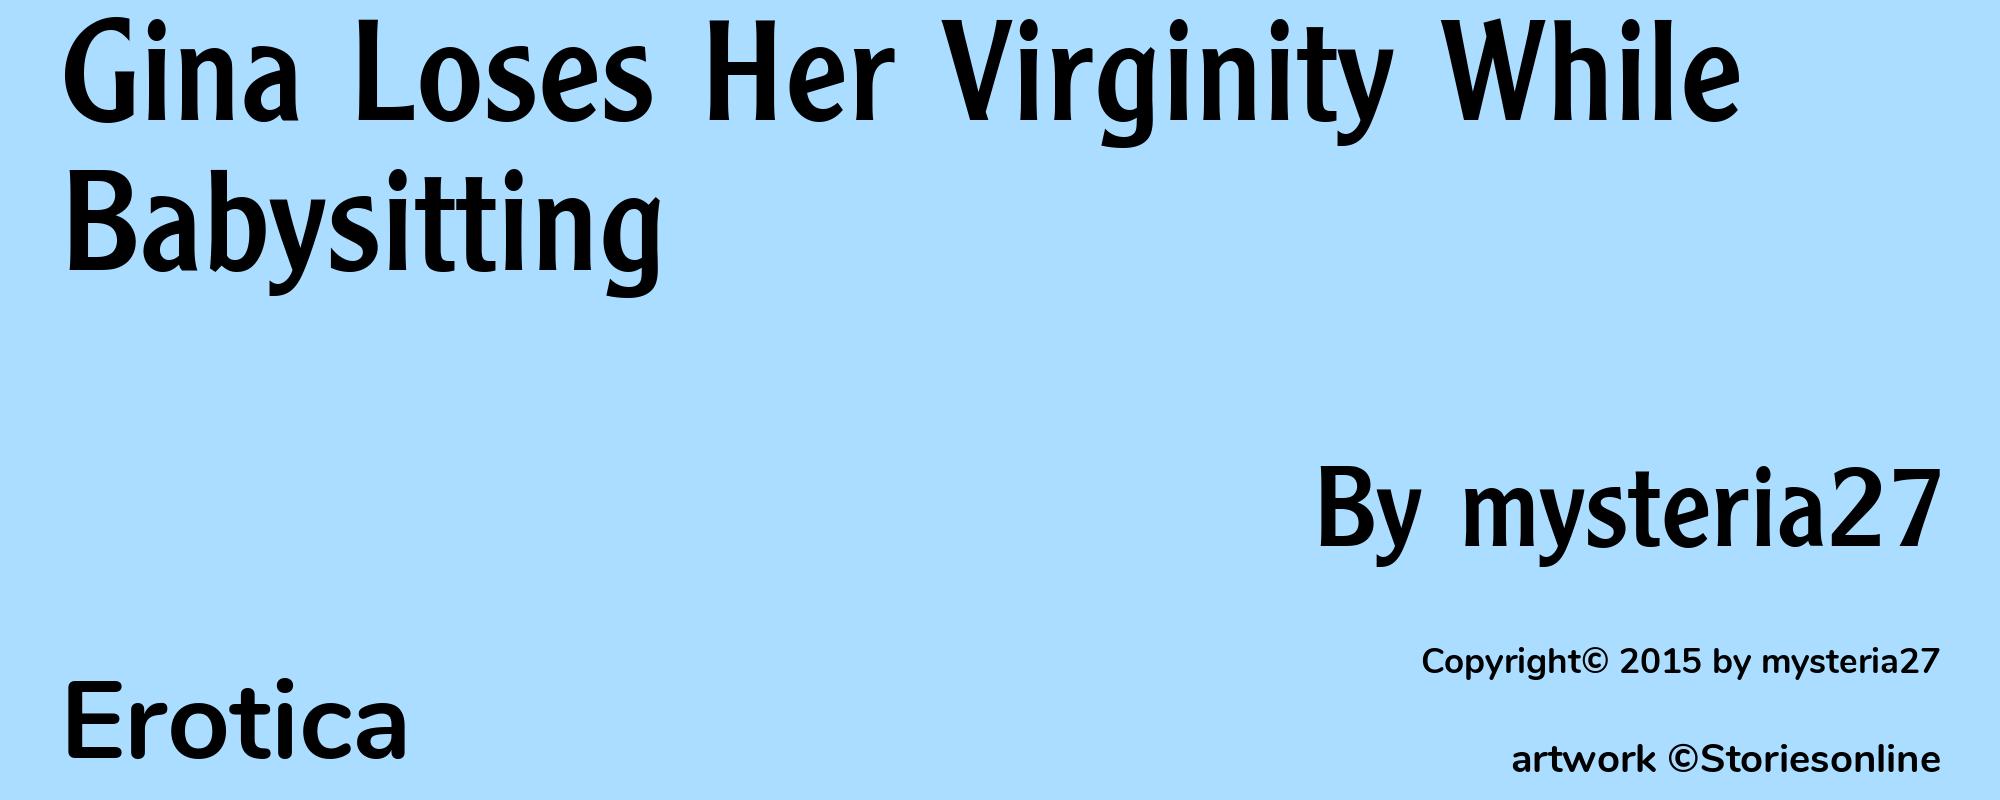 Gina Loses Her Virginity While Babysitting - Cover